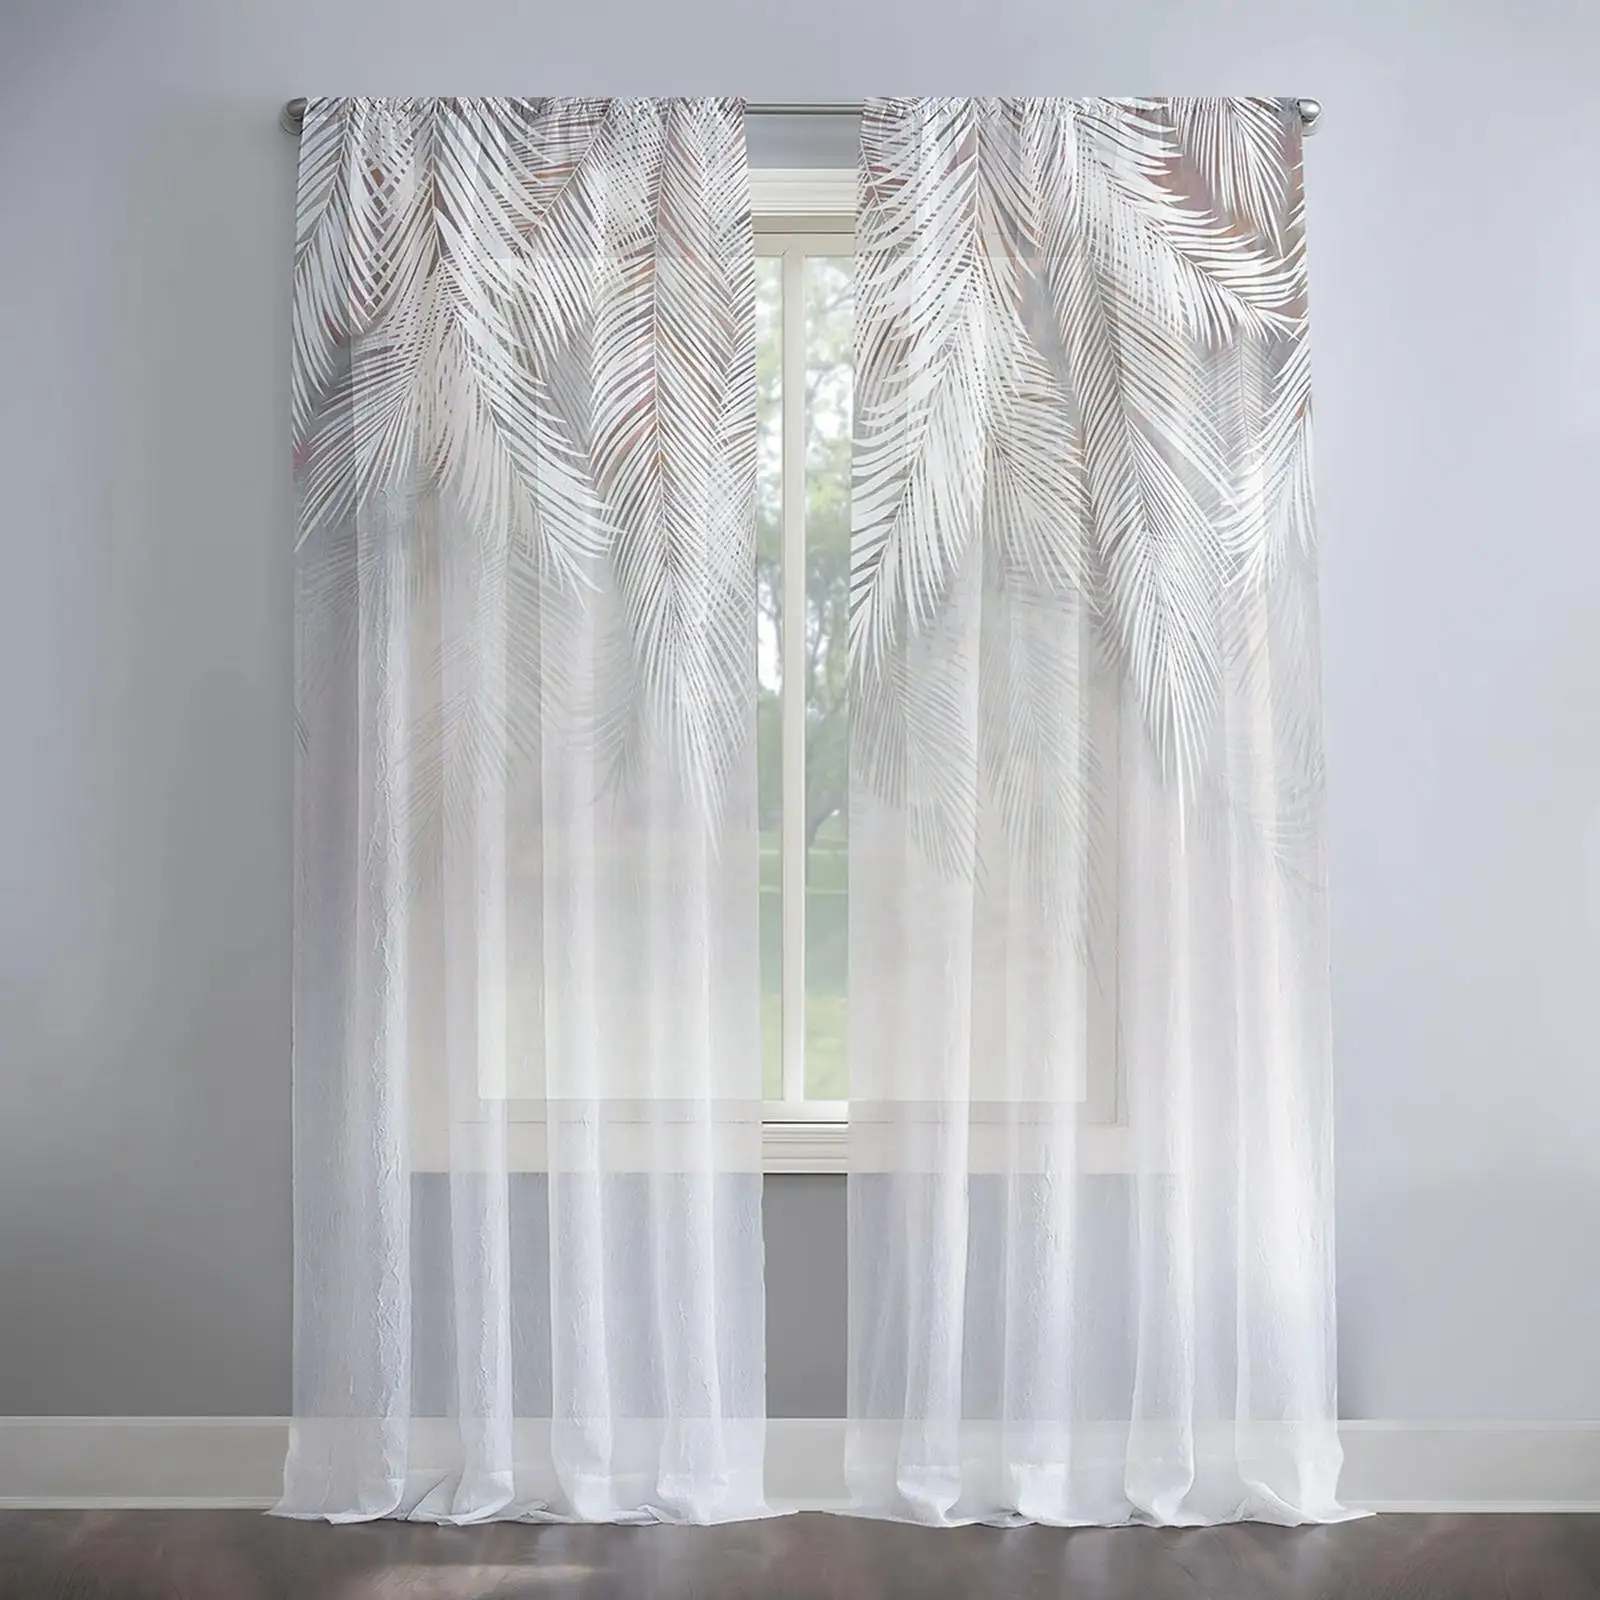 White Yarn Curtain Versatile Breathable Decor Semi Sheer Curtains Sheer Curtain for Dining Room Bedroom Living Room Kitchen